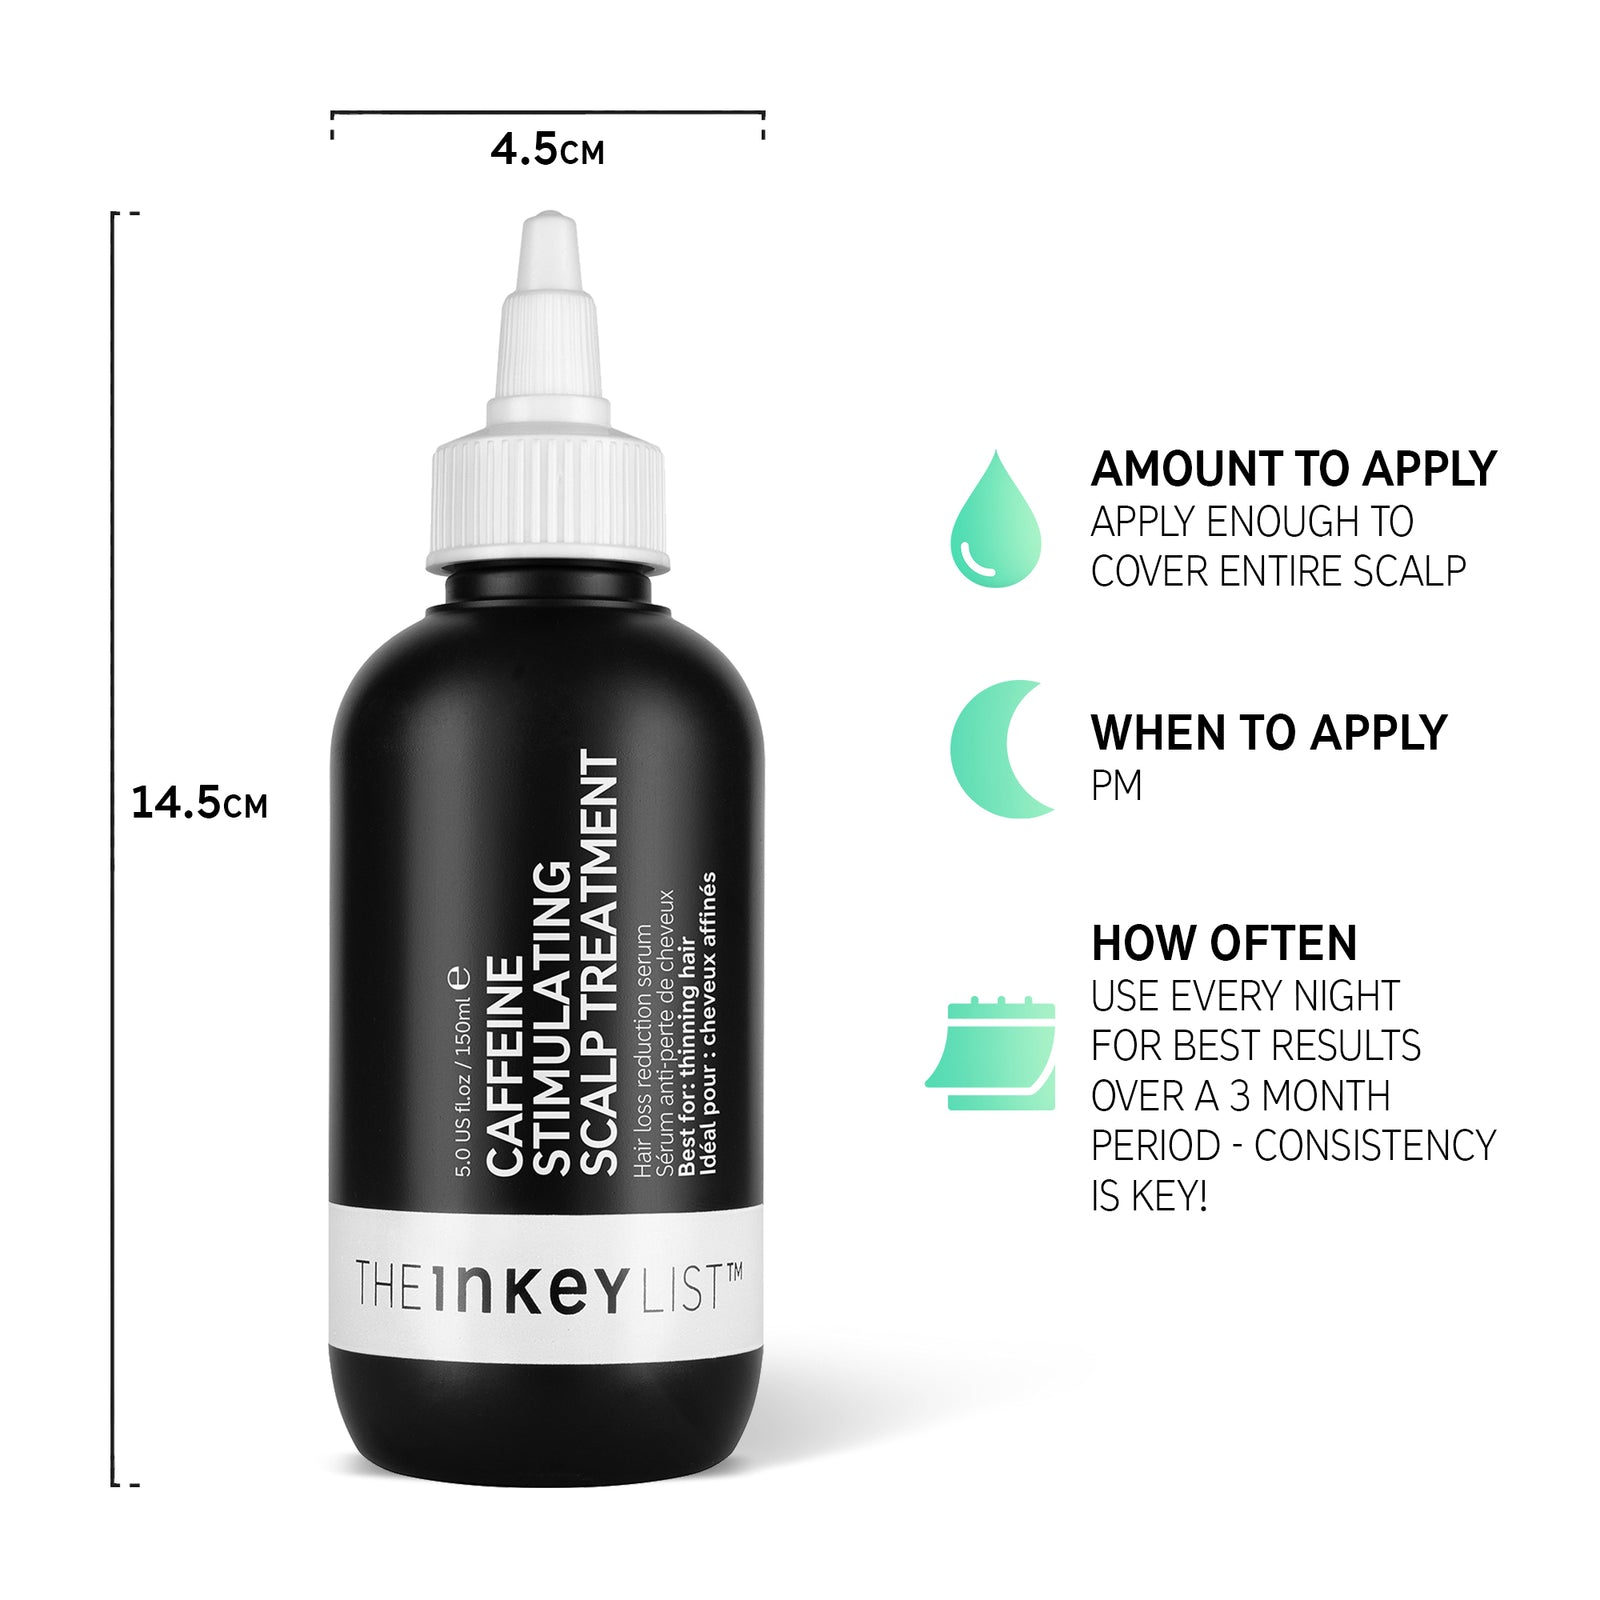 Hair Growth & Volume Duo Caffeine Scalp Treatment bottle infographic with bottle dimensions and text that reads 'amount to apply (apply enough to cover scalp), when to apply (PM) and how often to use (use everynight for best results over a 3 month period - consistency is key!')